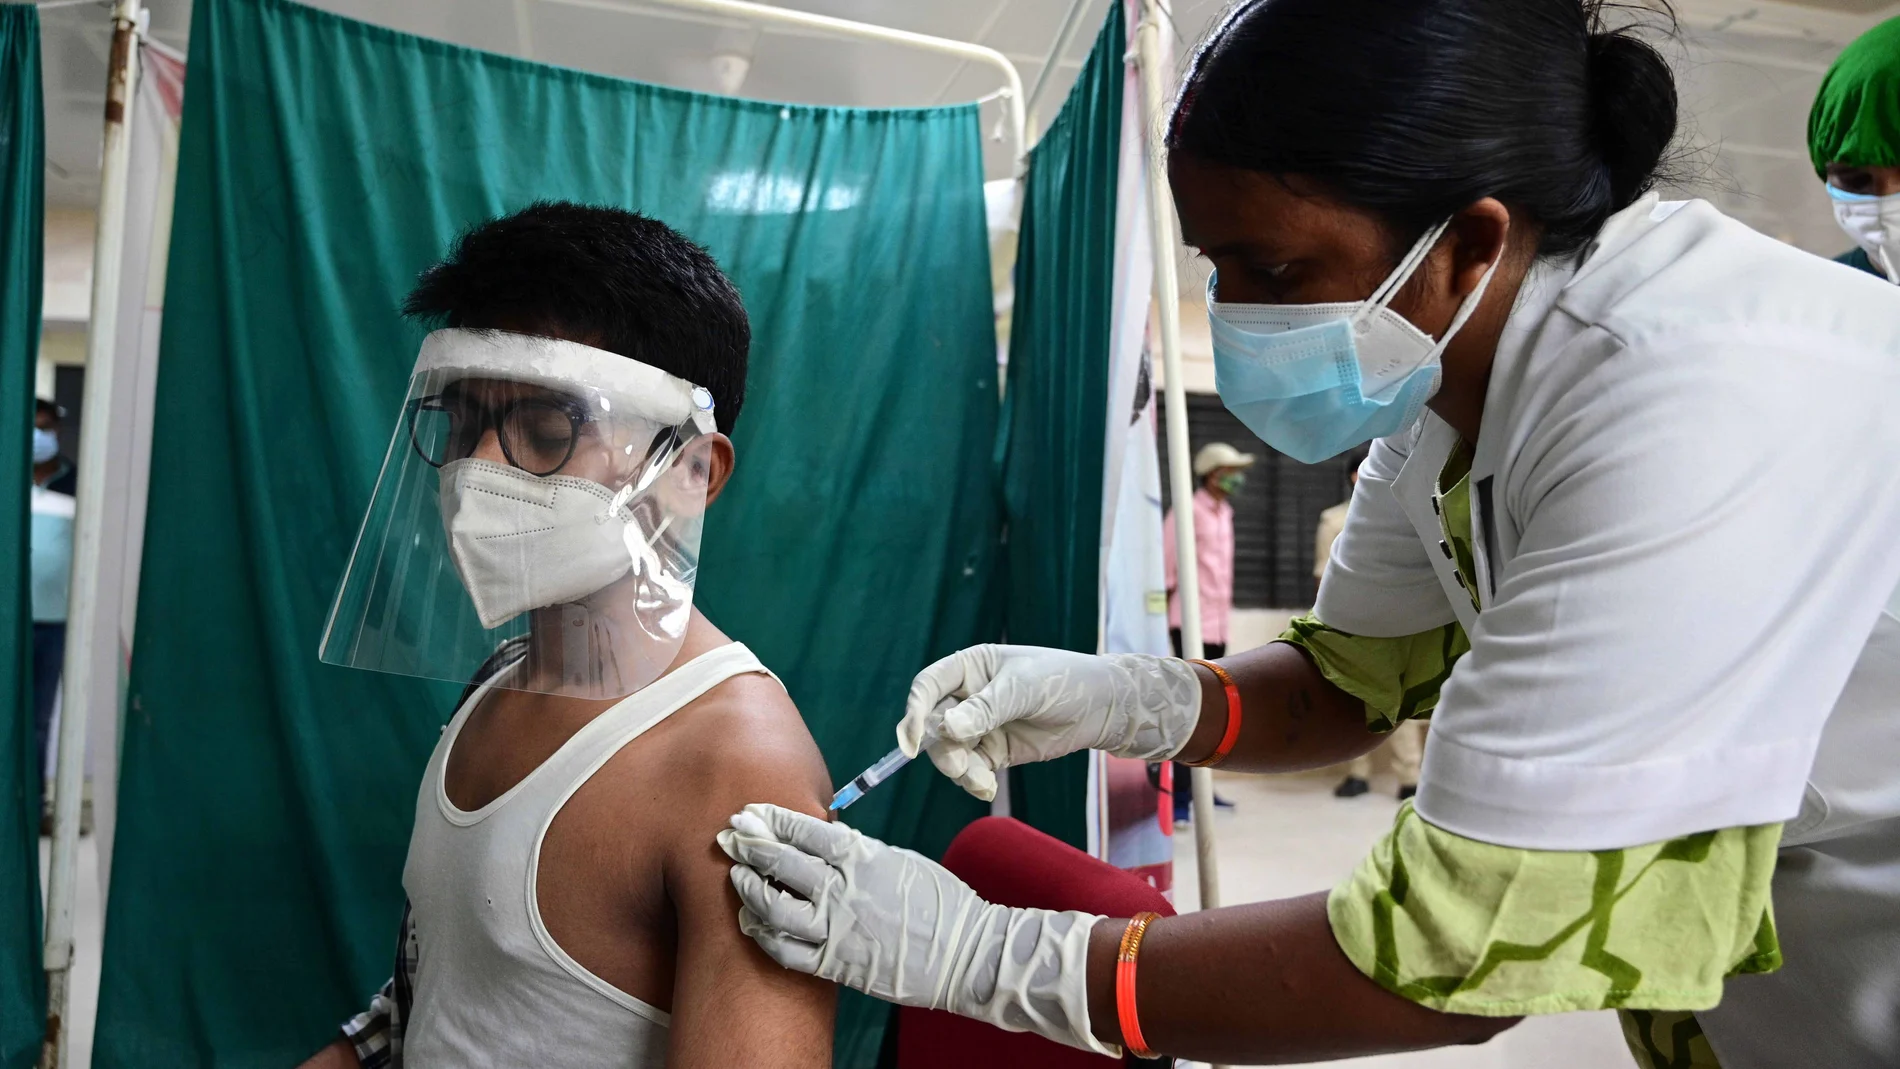 11 May 2021, India, Prayagraj: A man receives a dose of a coronavirus (COVID-19) vaccine at Moti Lal Nehru Medical College. Today, Tuesday, the Indian Ministry of Health announced the registration of 329,942 new cases of Coronavirus during the past 24 hours. Photo: Prabhat Kumar Verma/ZUMA Wire/dpaPrabhat Kumar Verma/ZUMA Wire/dp / DPA11/05/2021 ONLY FOR USE IN SPAIN